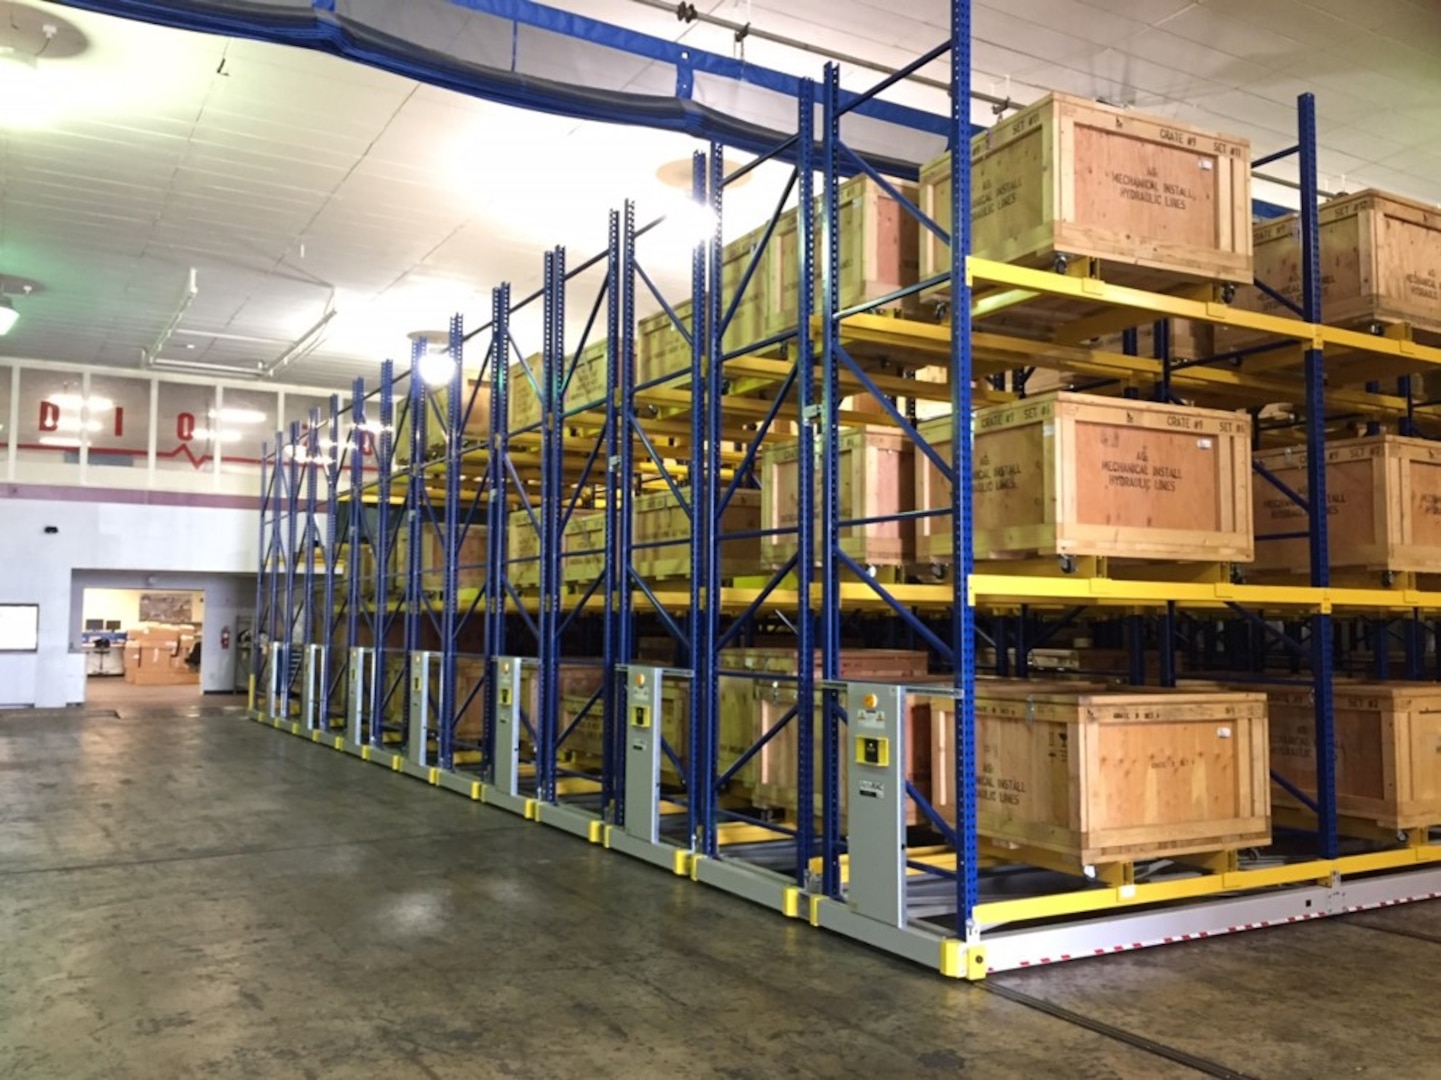 The 575th Aircraft Maintenance Squadron at Randolph AFB, Texas, installed an ACTIVRAC 16 high-density mobile storage shelving system. The storage system is a three-tiered shelf rack, 14-feet high and mounted on rails with 13 movable sections known as carriages. (Courtesy photo)